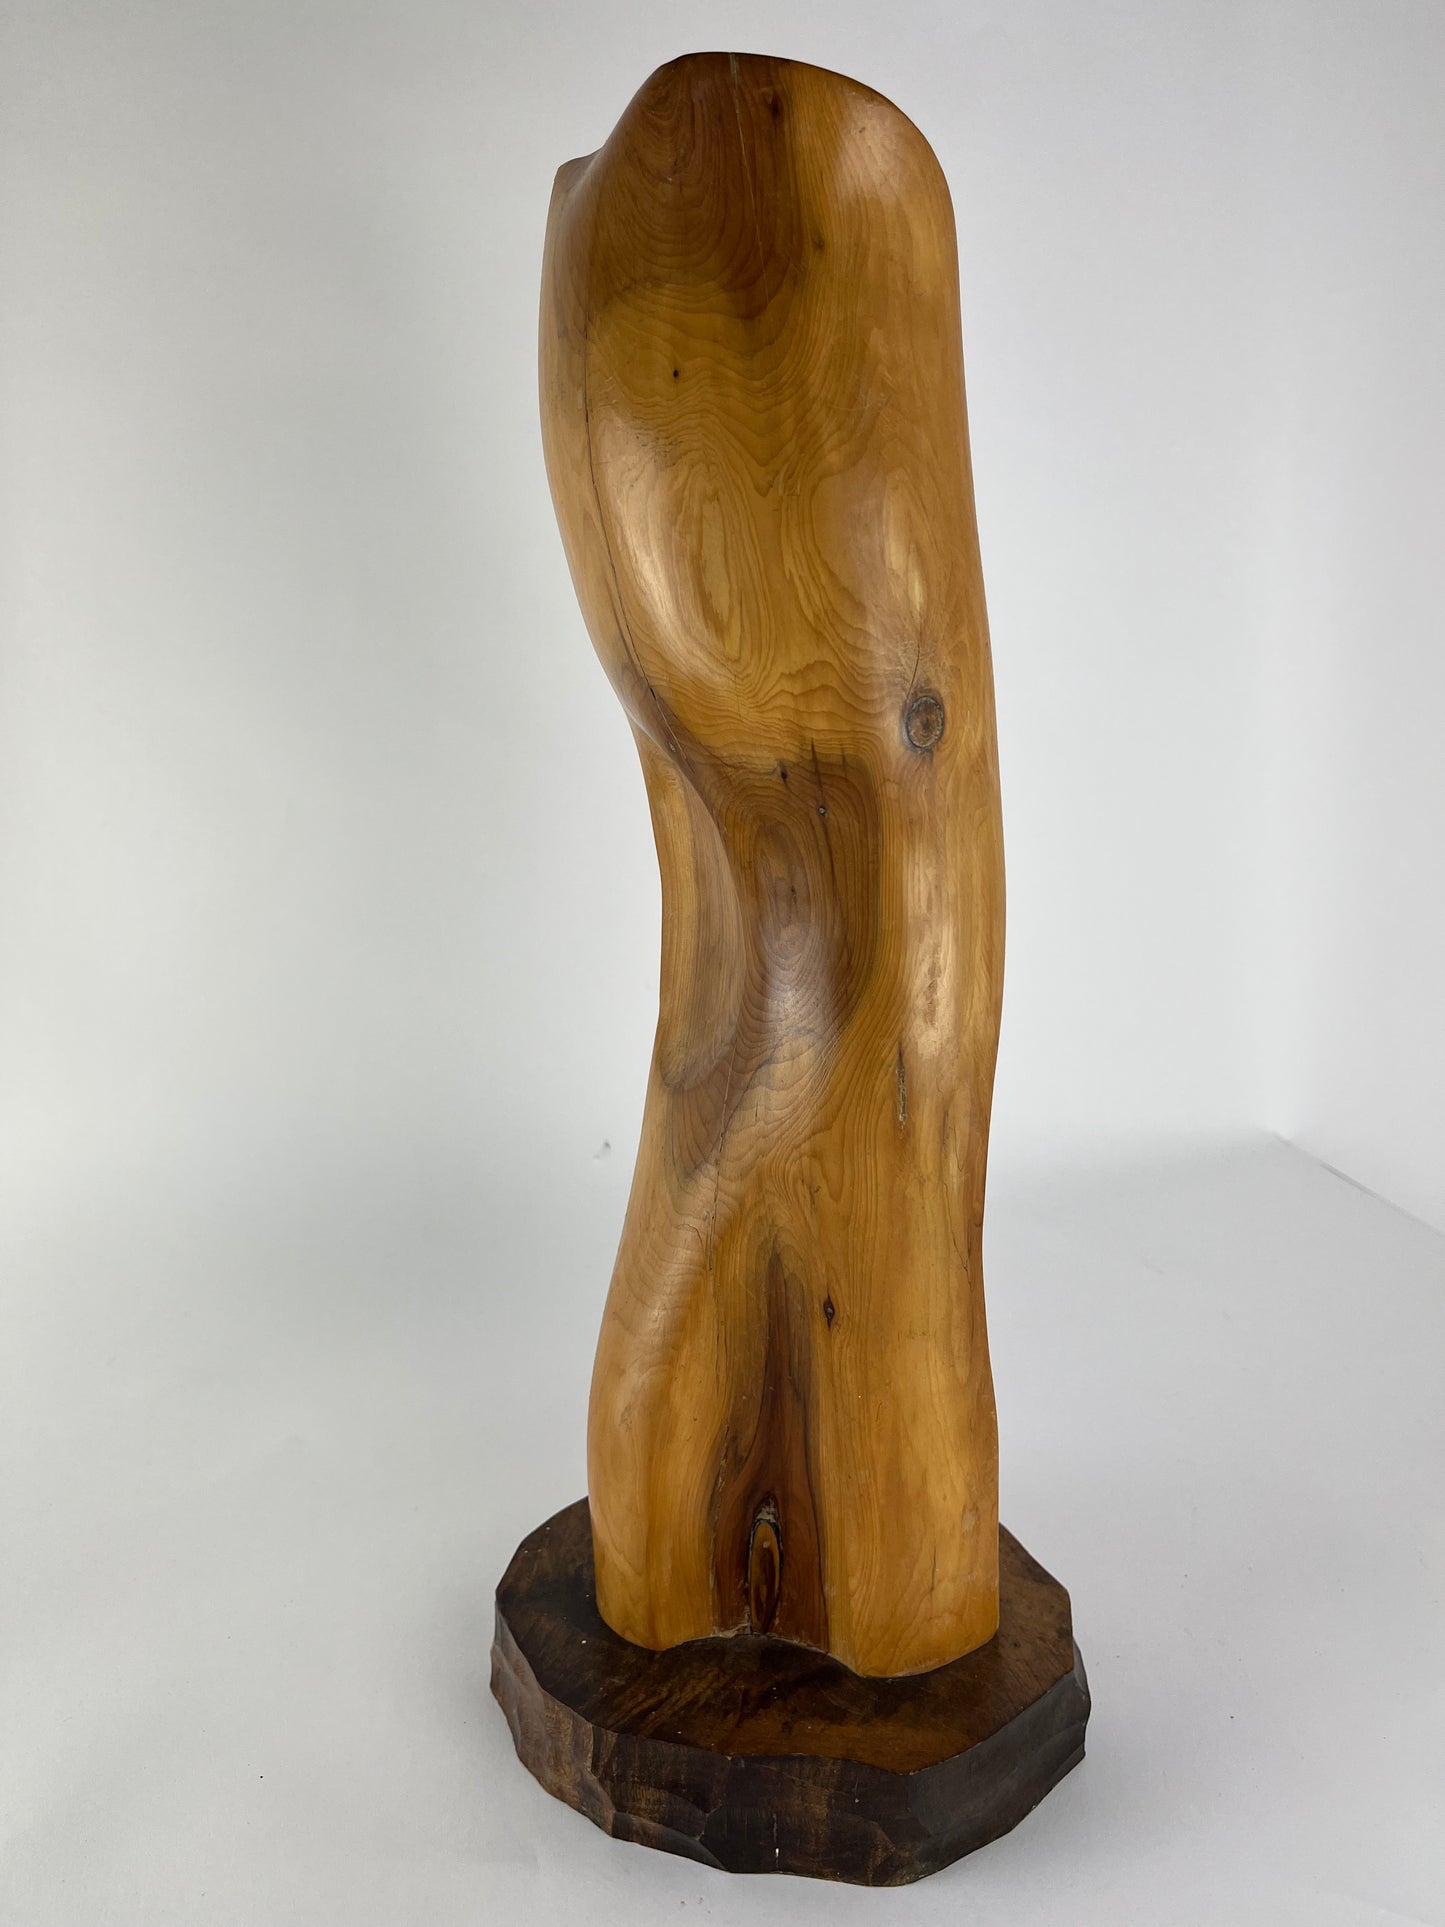 RUSSELL WATSON HANDCRAFTED SYCAMORE SCULPTURE